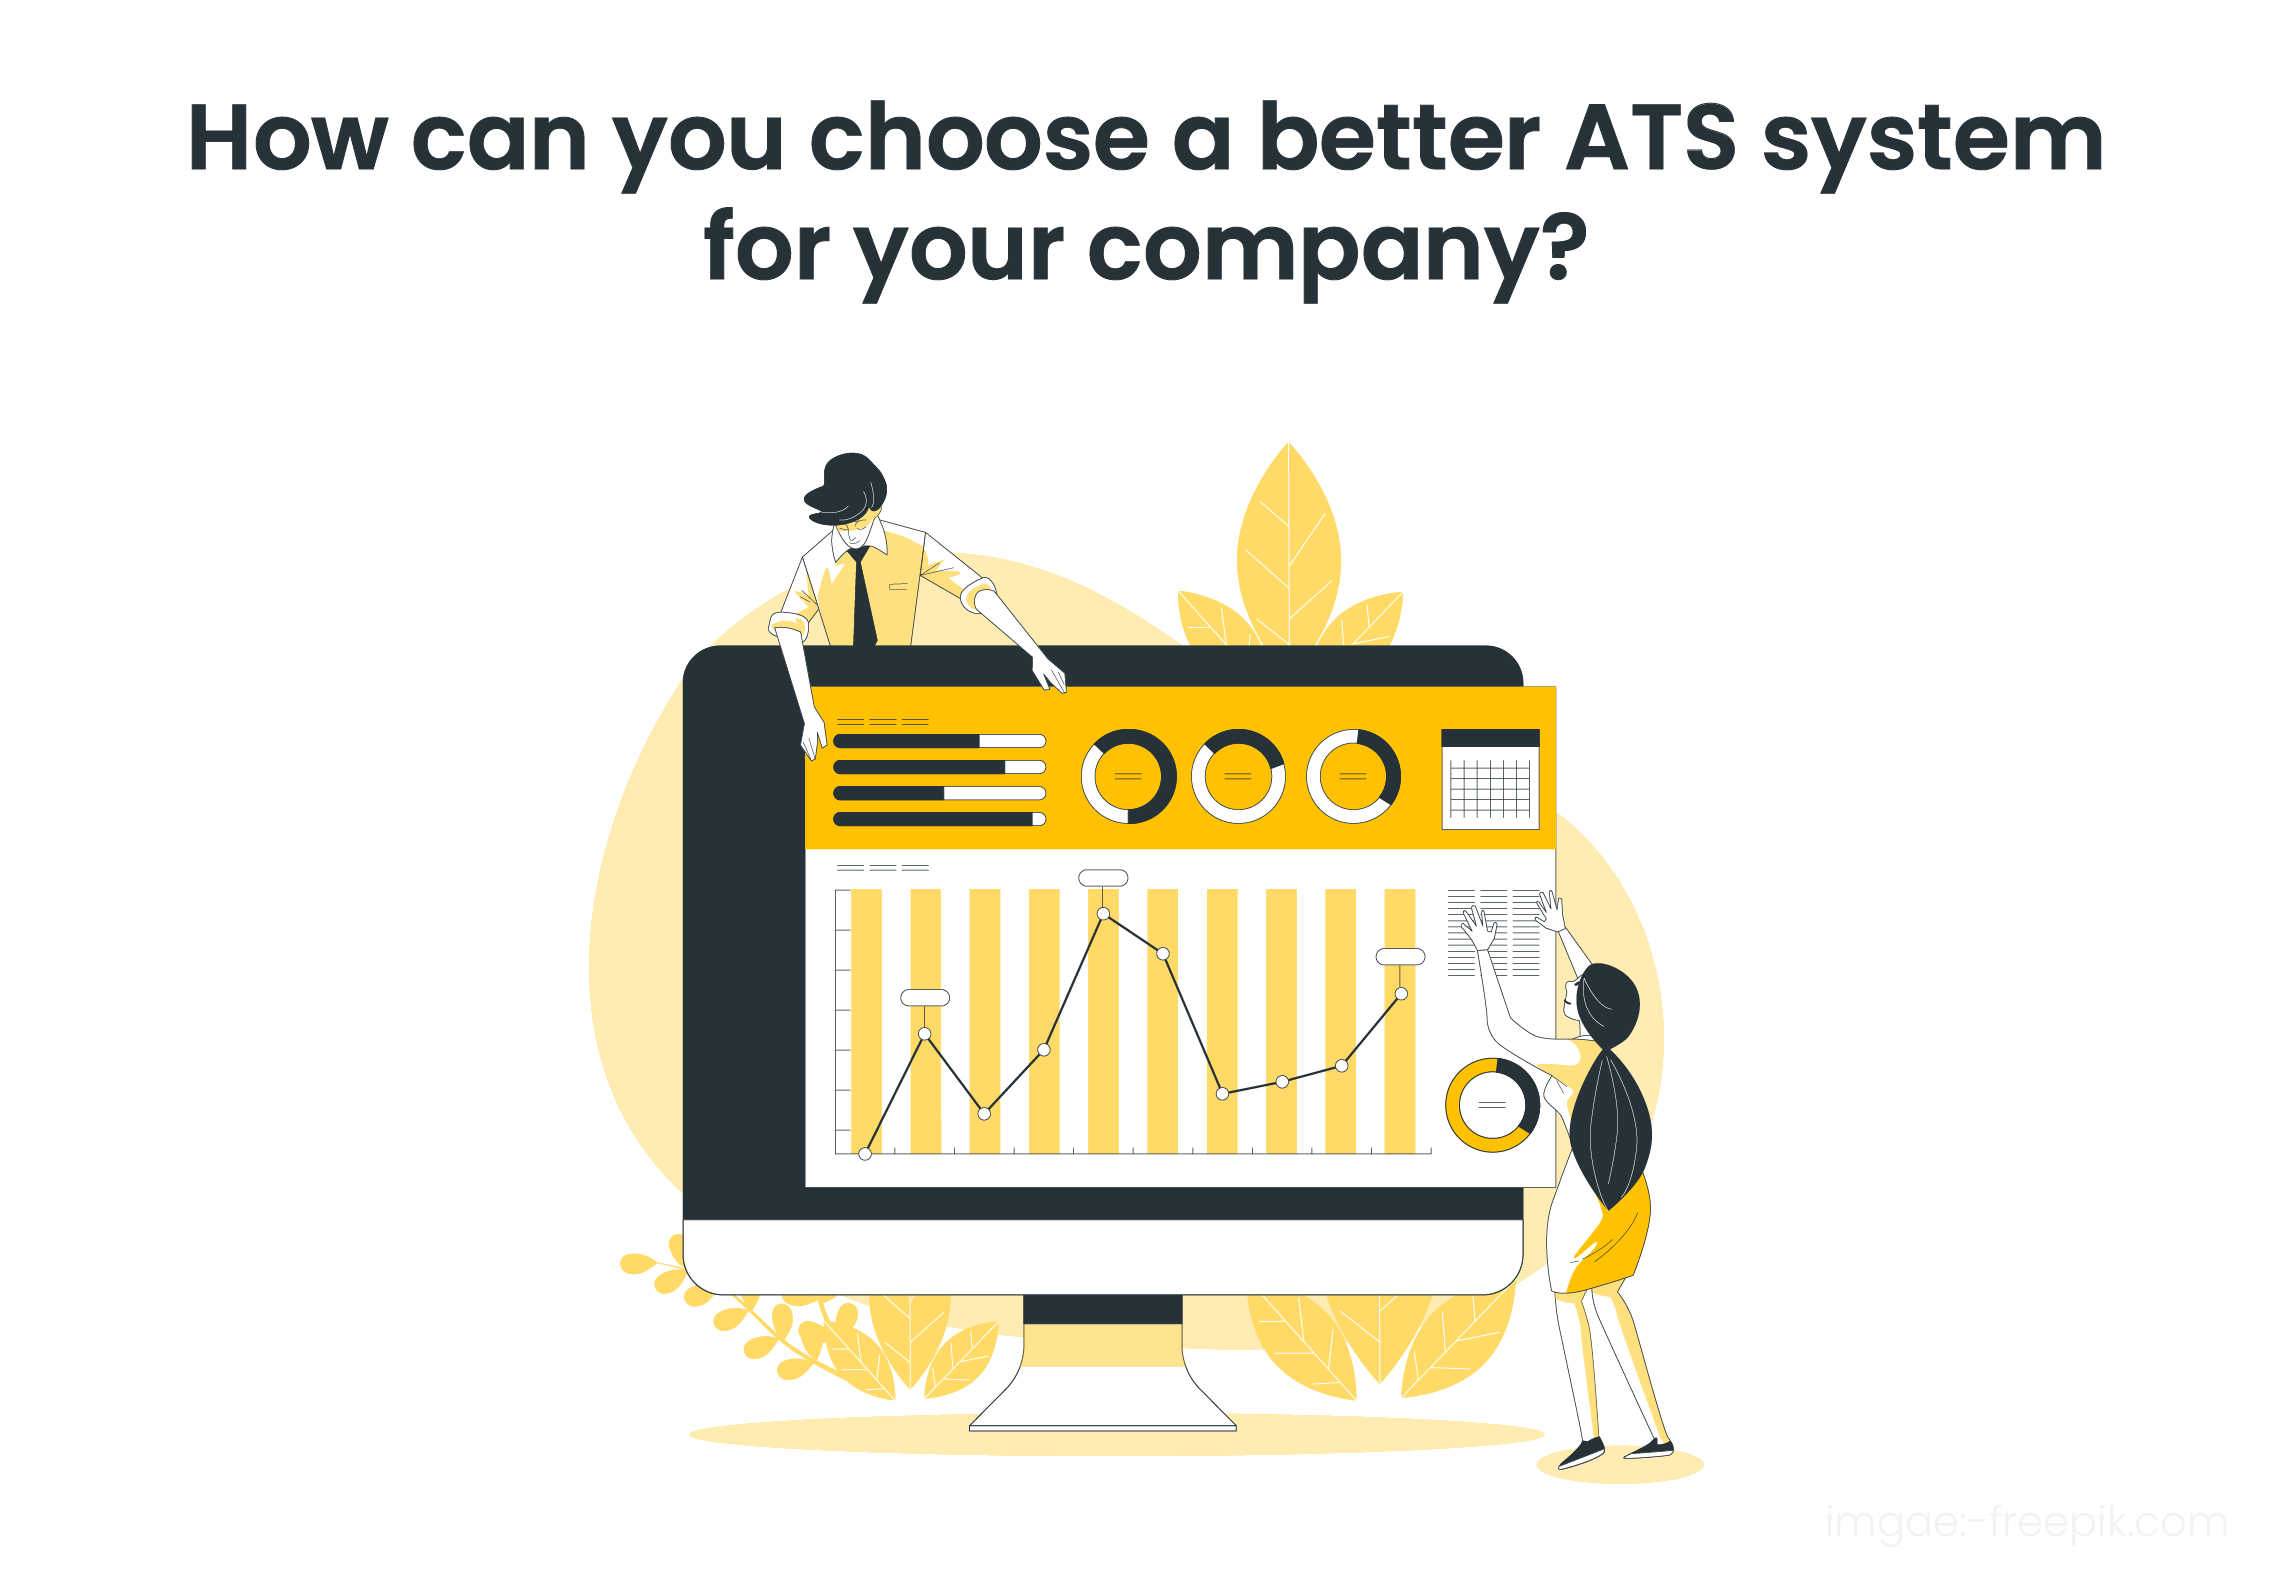 How can one choose a better ATS system for your company?